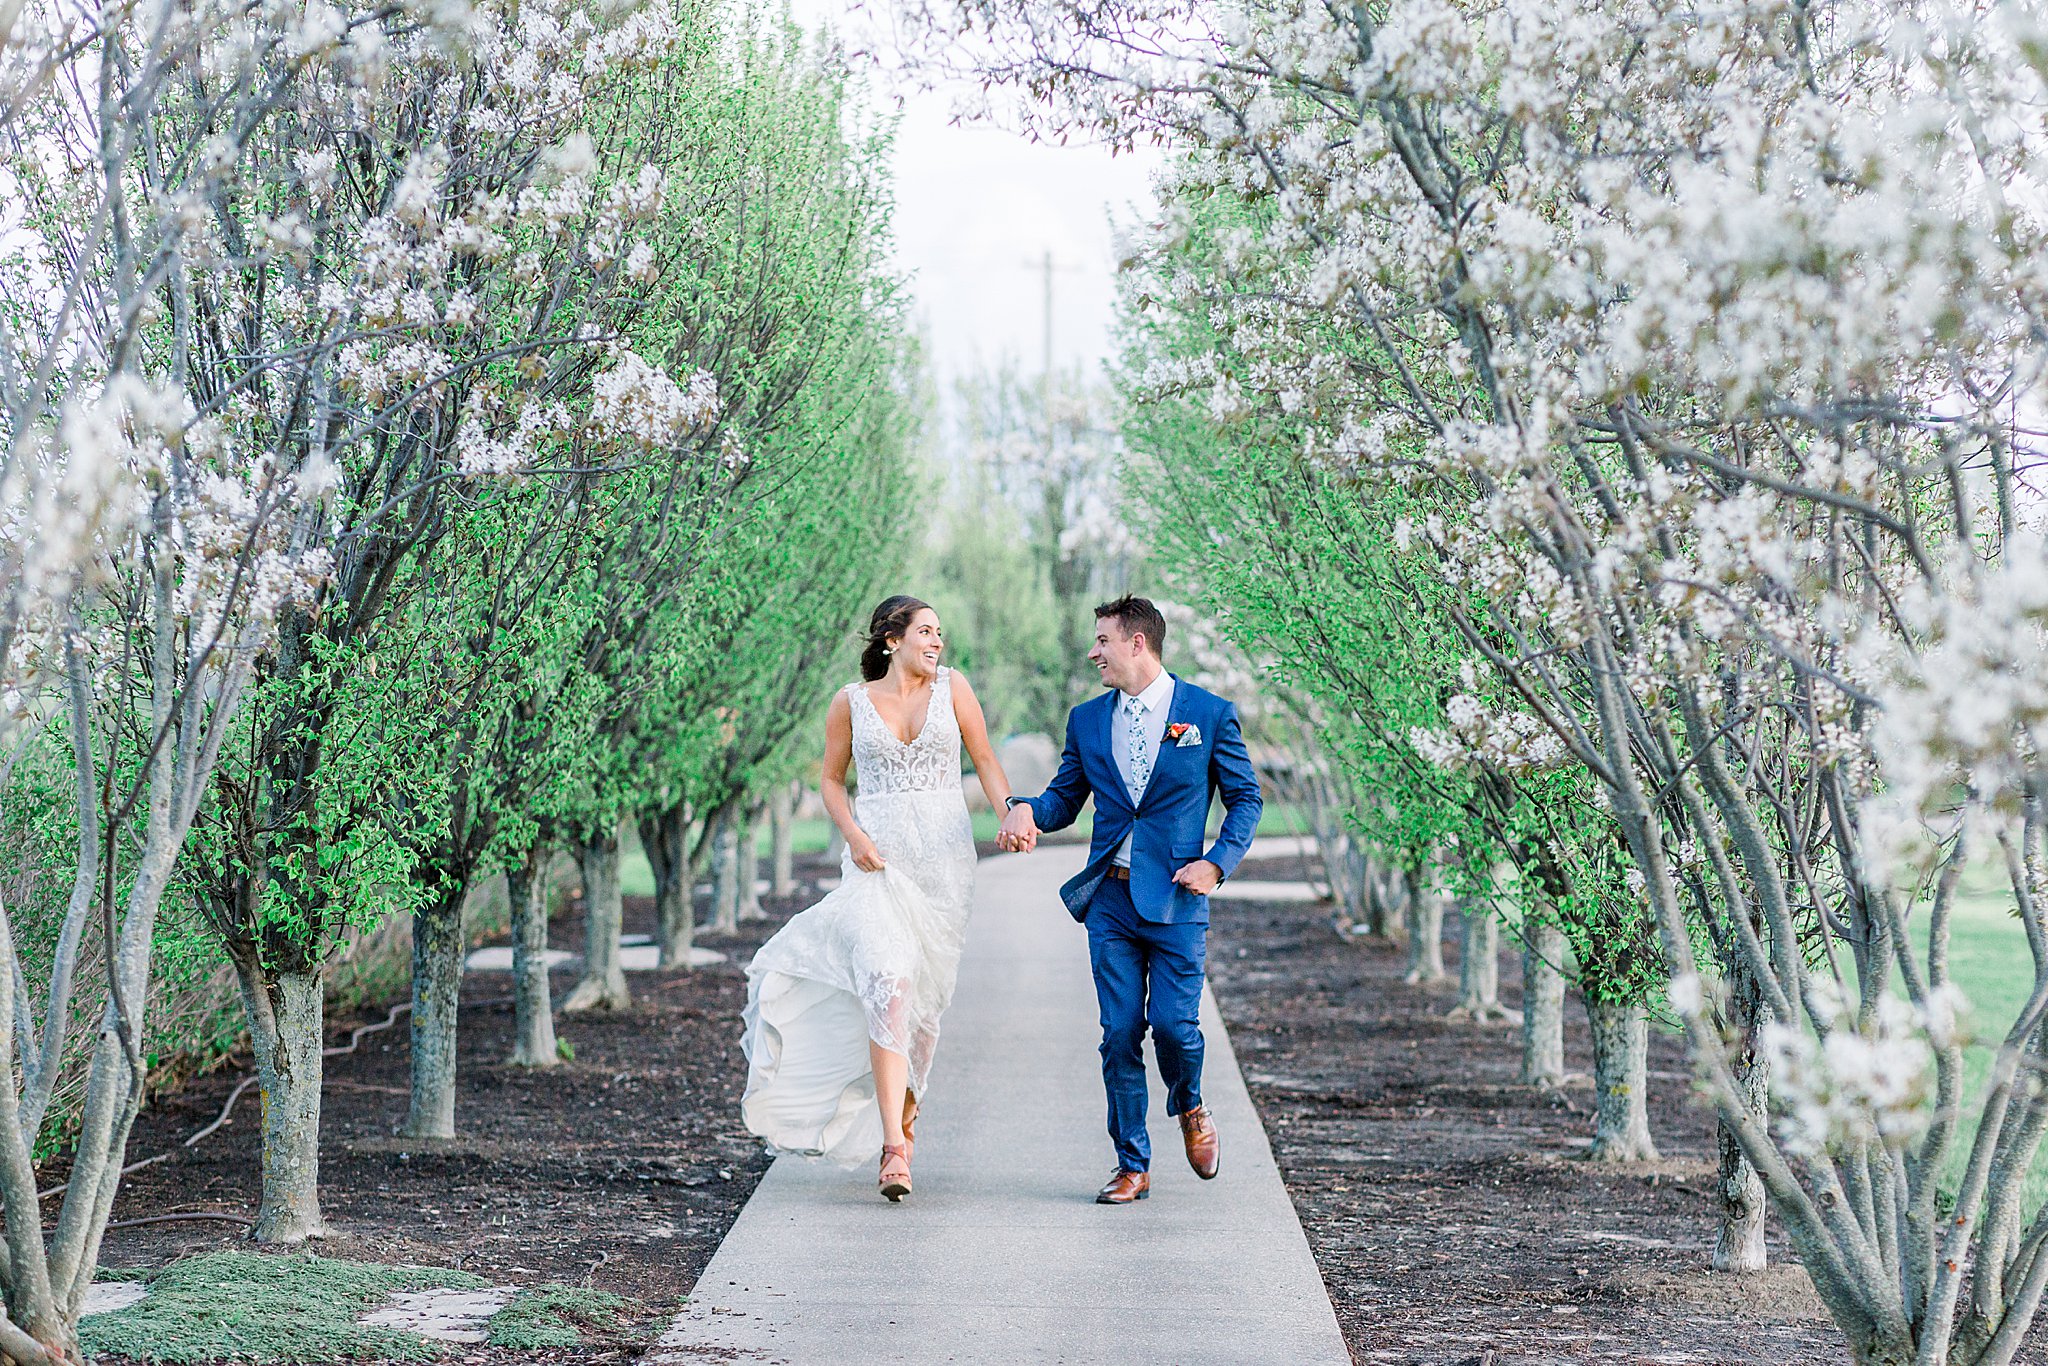 Bride and Groom run through cherry blossoms at Spring Castle Farms wedding.